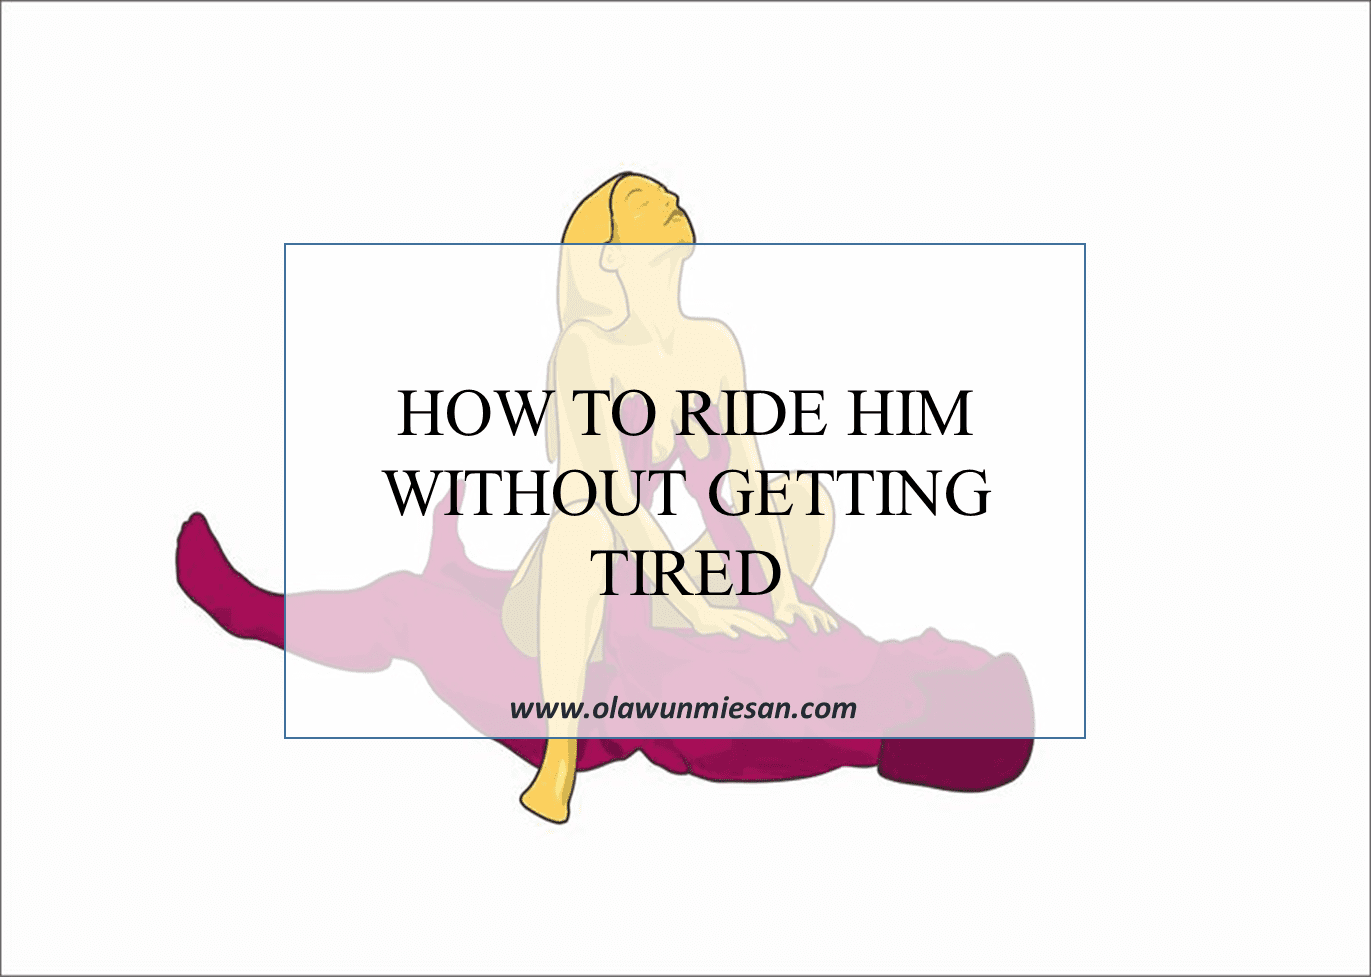 How To Ride A Man